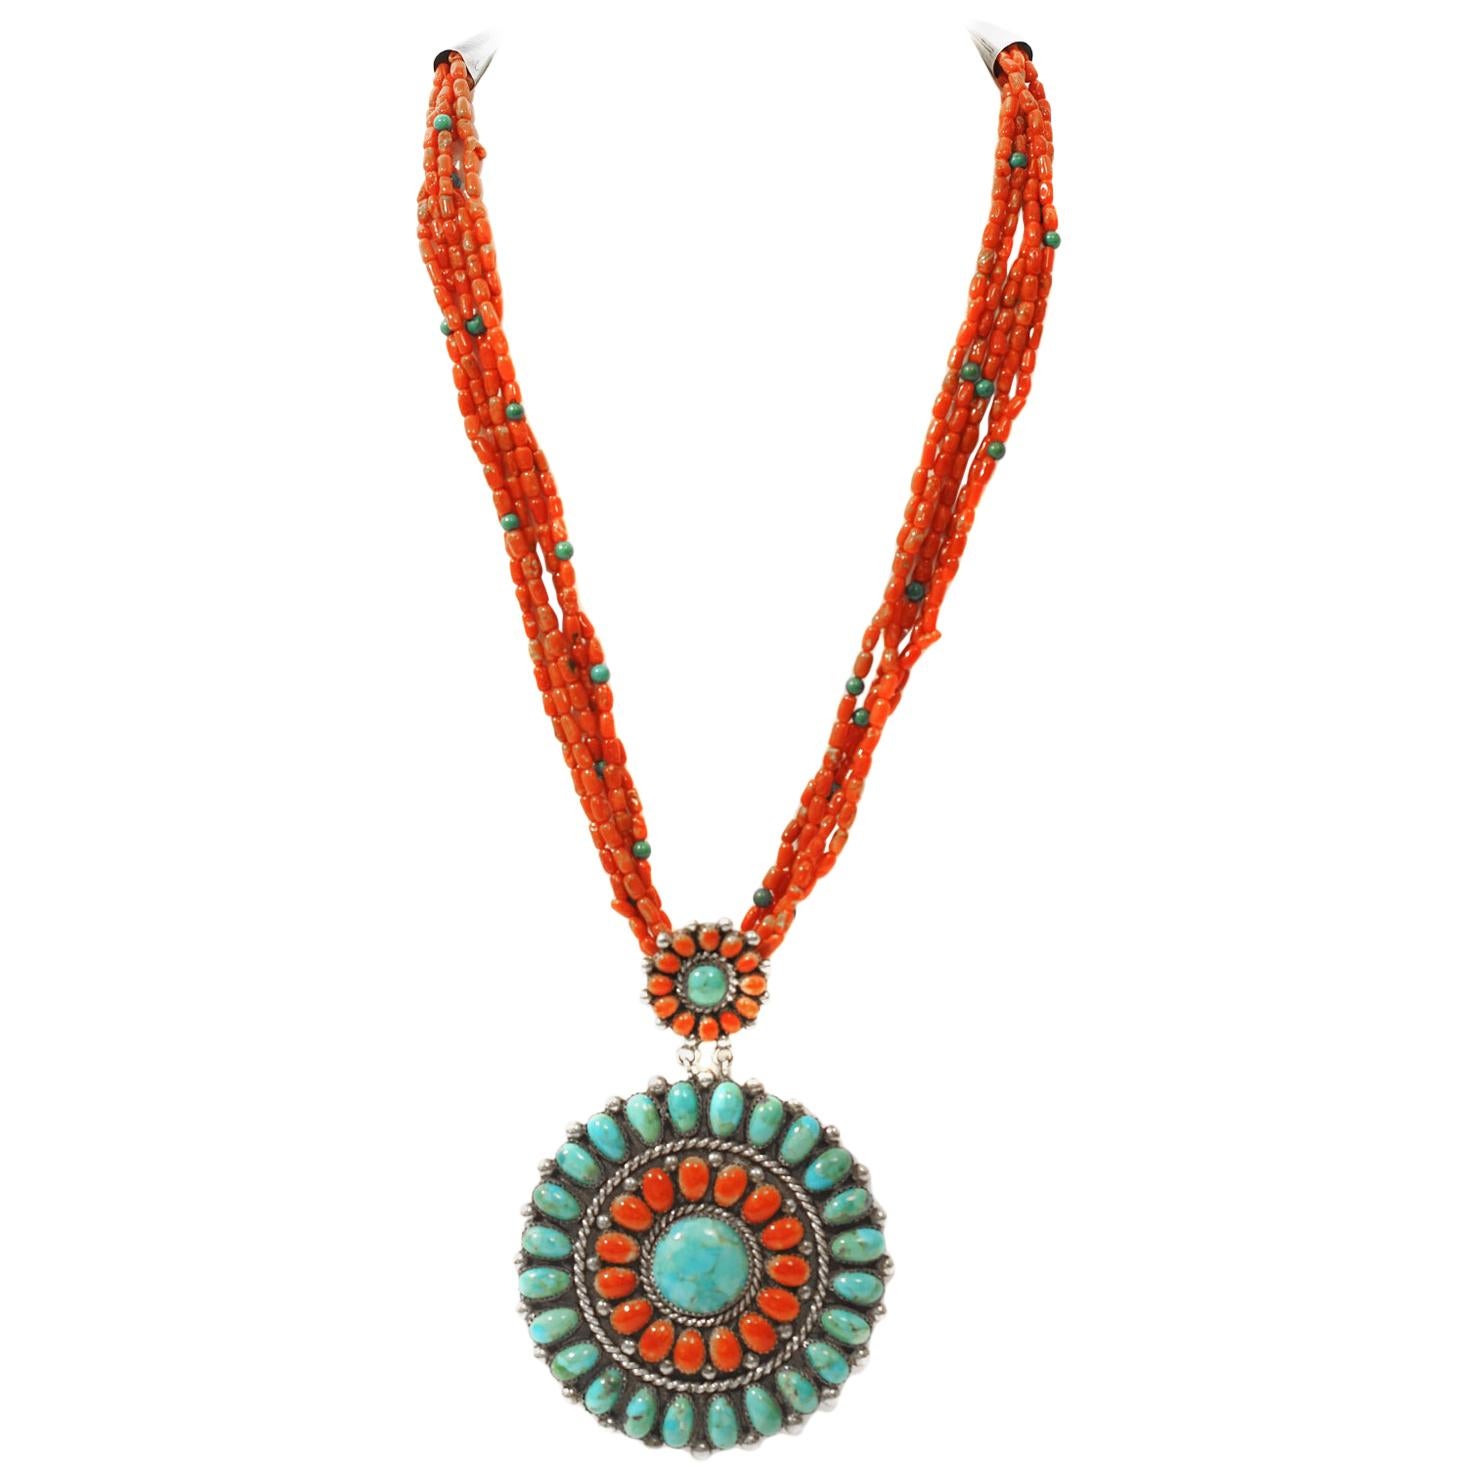 Coral and Turquoise Necklace with Fabulous Medallion